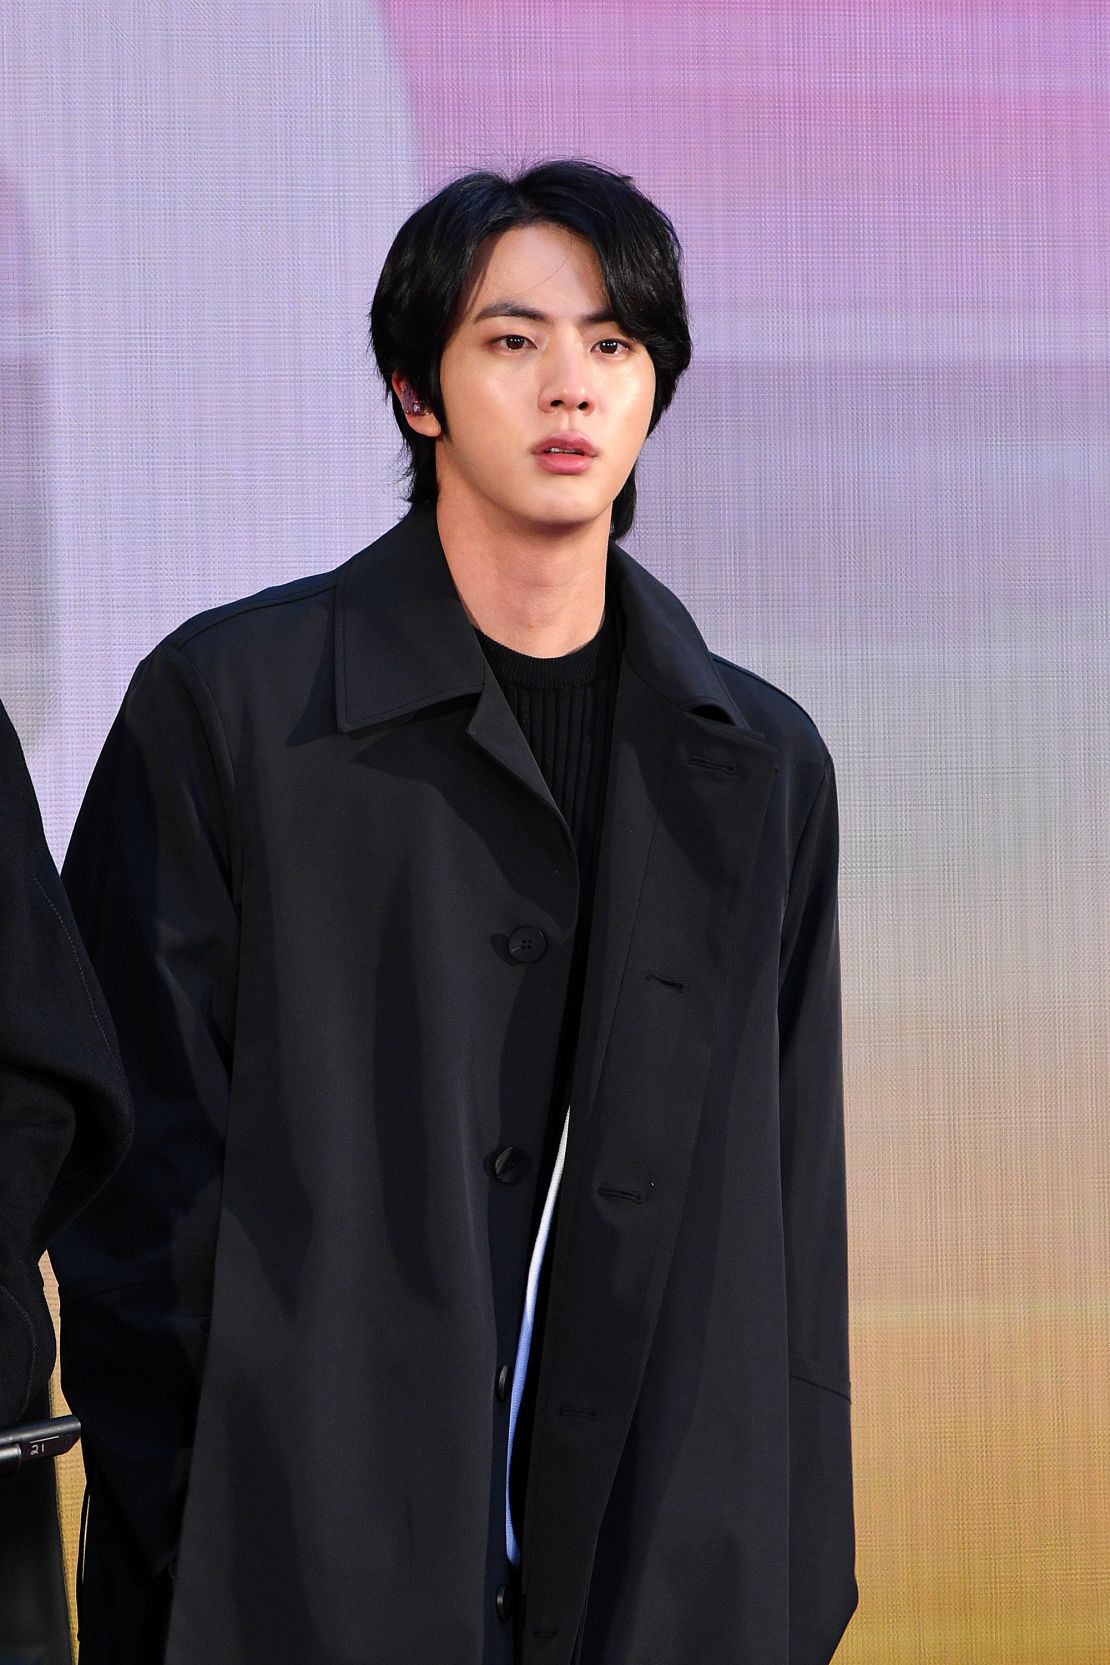 Jin, a member of K-pop boy band BTS, has a shapely wolf cut style with long tapered layers and a trailing tail.